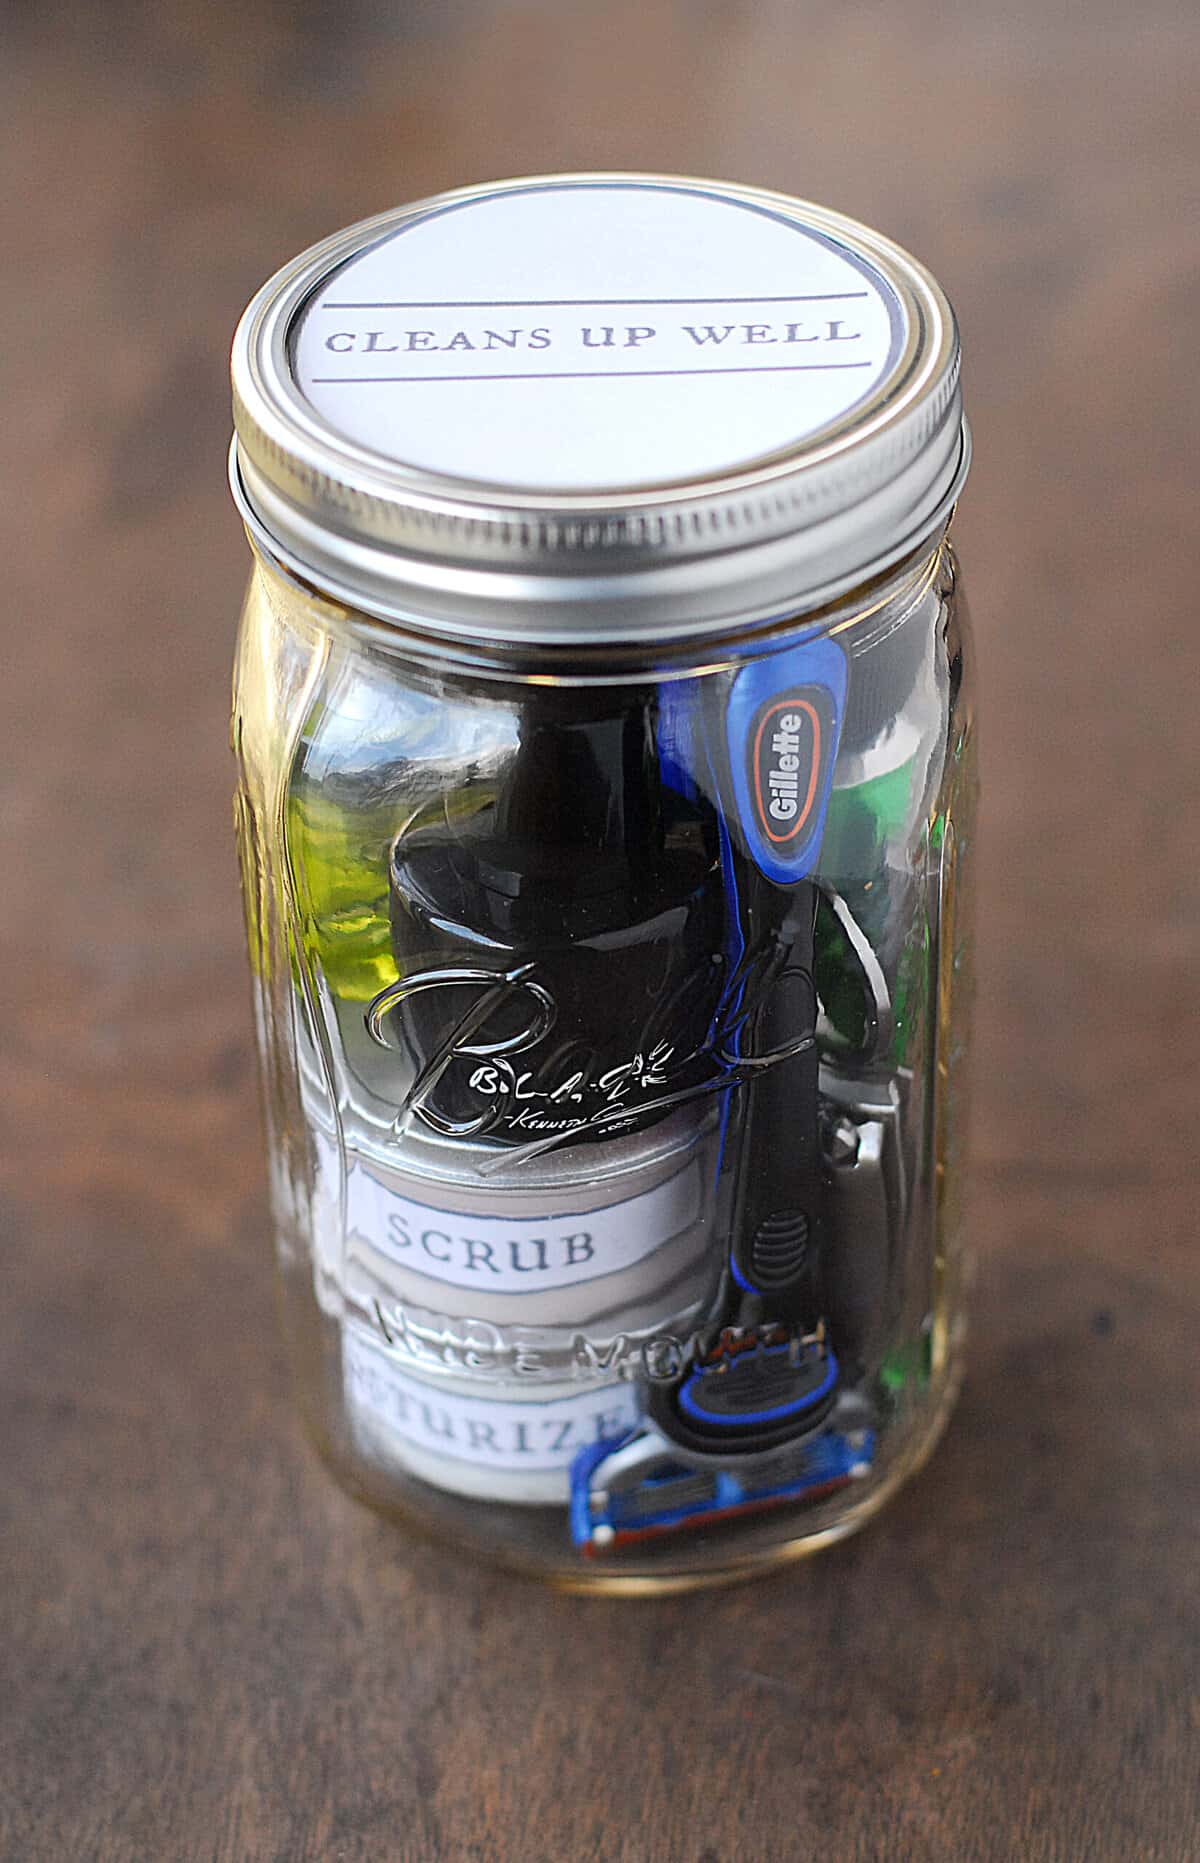 Cleans up well mason jar.